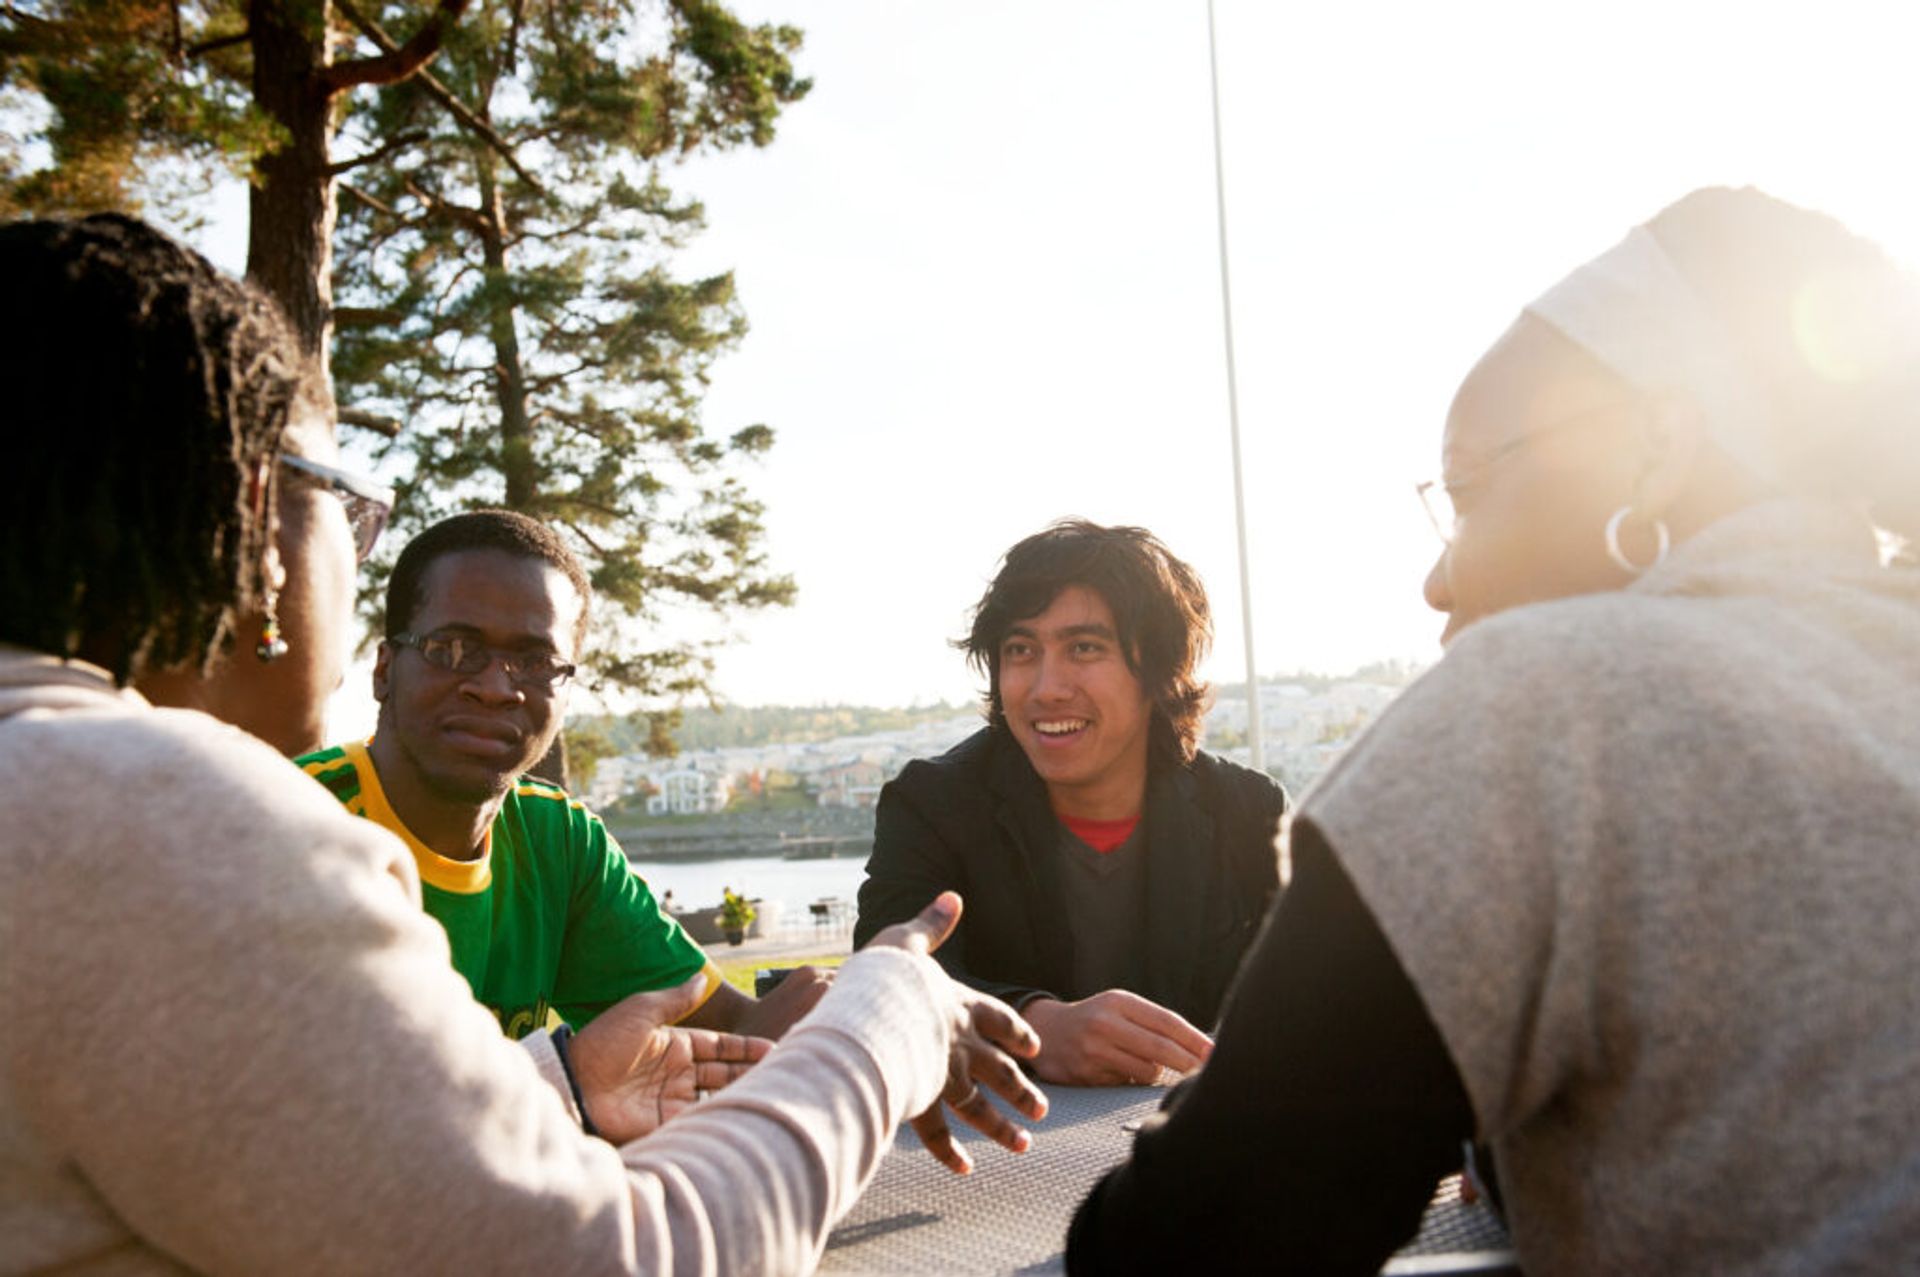 A group of international people in Sweden sitting at a table outdoors and hanging out.